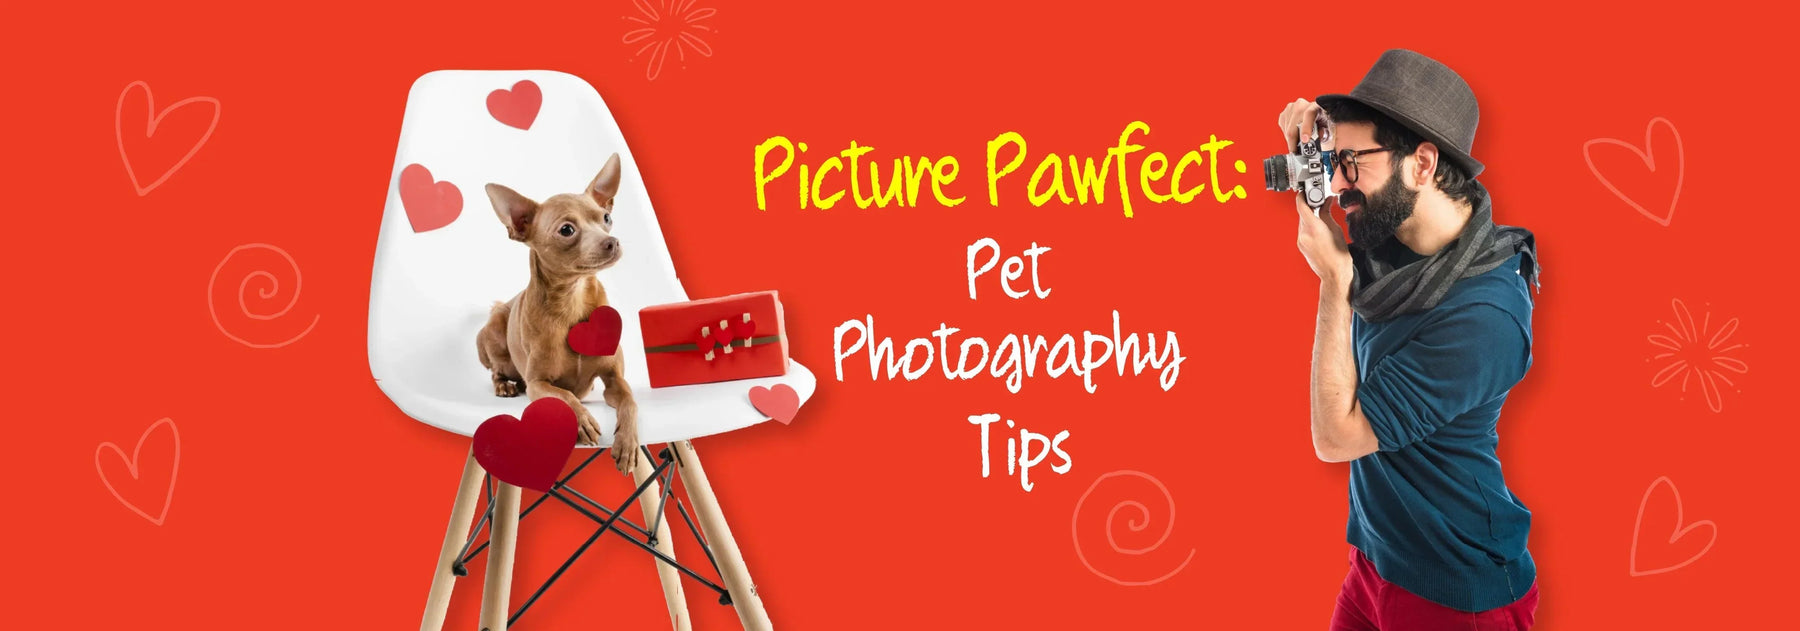 Picture Pawfect: Essential Pet Photography Tips - Ofypets